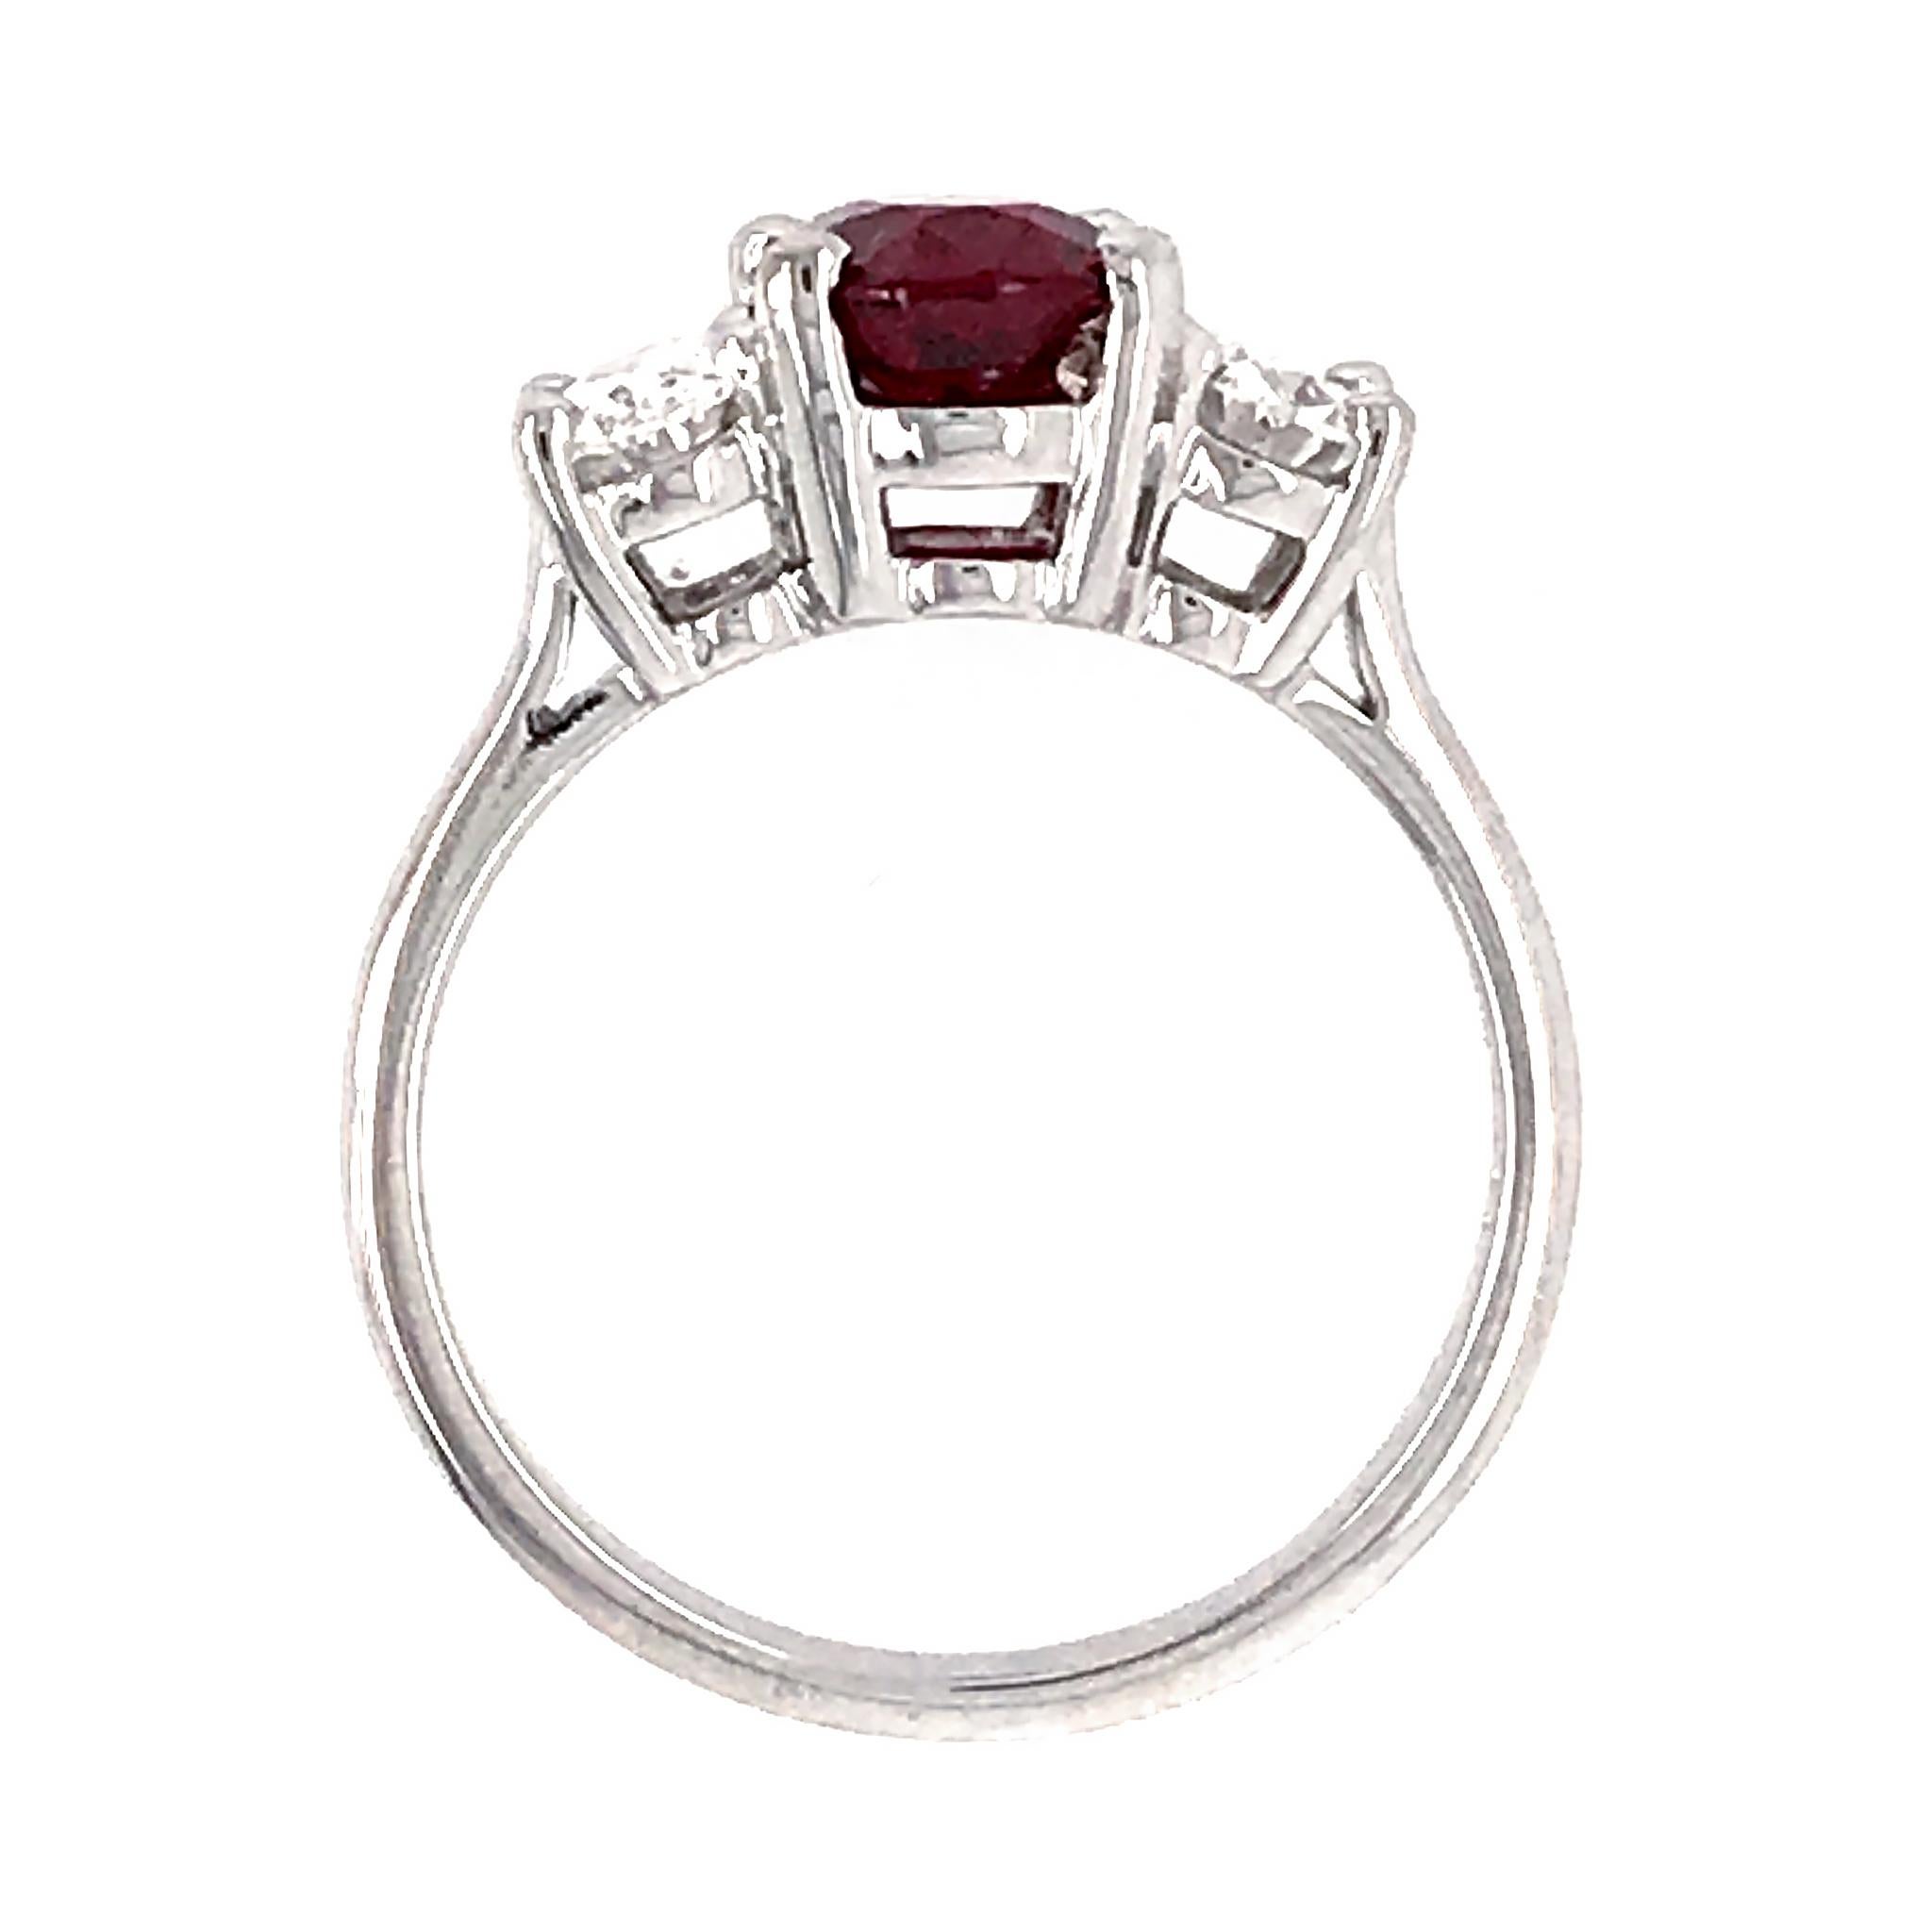 METAL TYPE: Platinum
RING SIZE: 6.75
STONE WEIGHT: Diamond 1.0 ct twd and Ruby 1.75 ct twd
REFERENCE NUMBER: 1218-IPPP